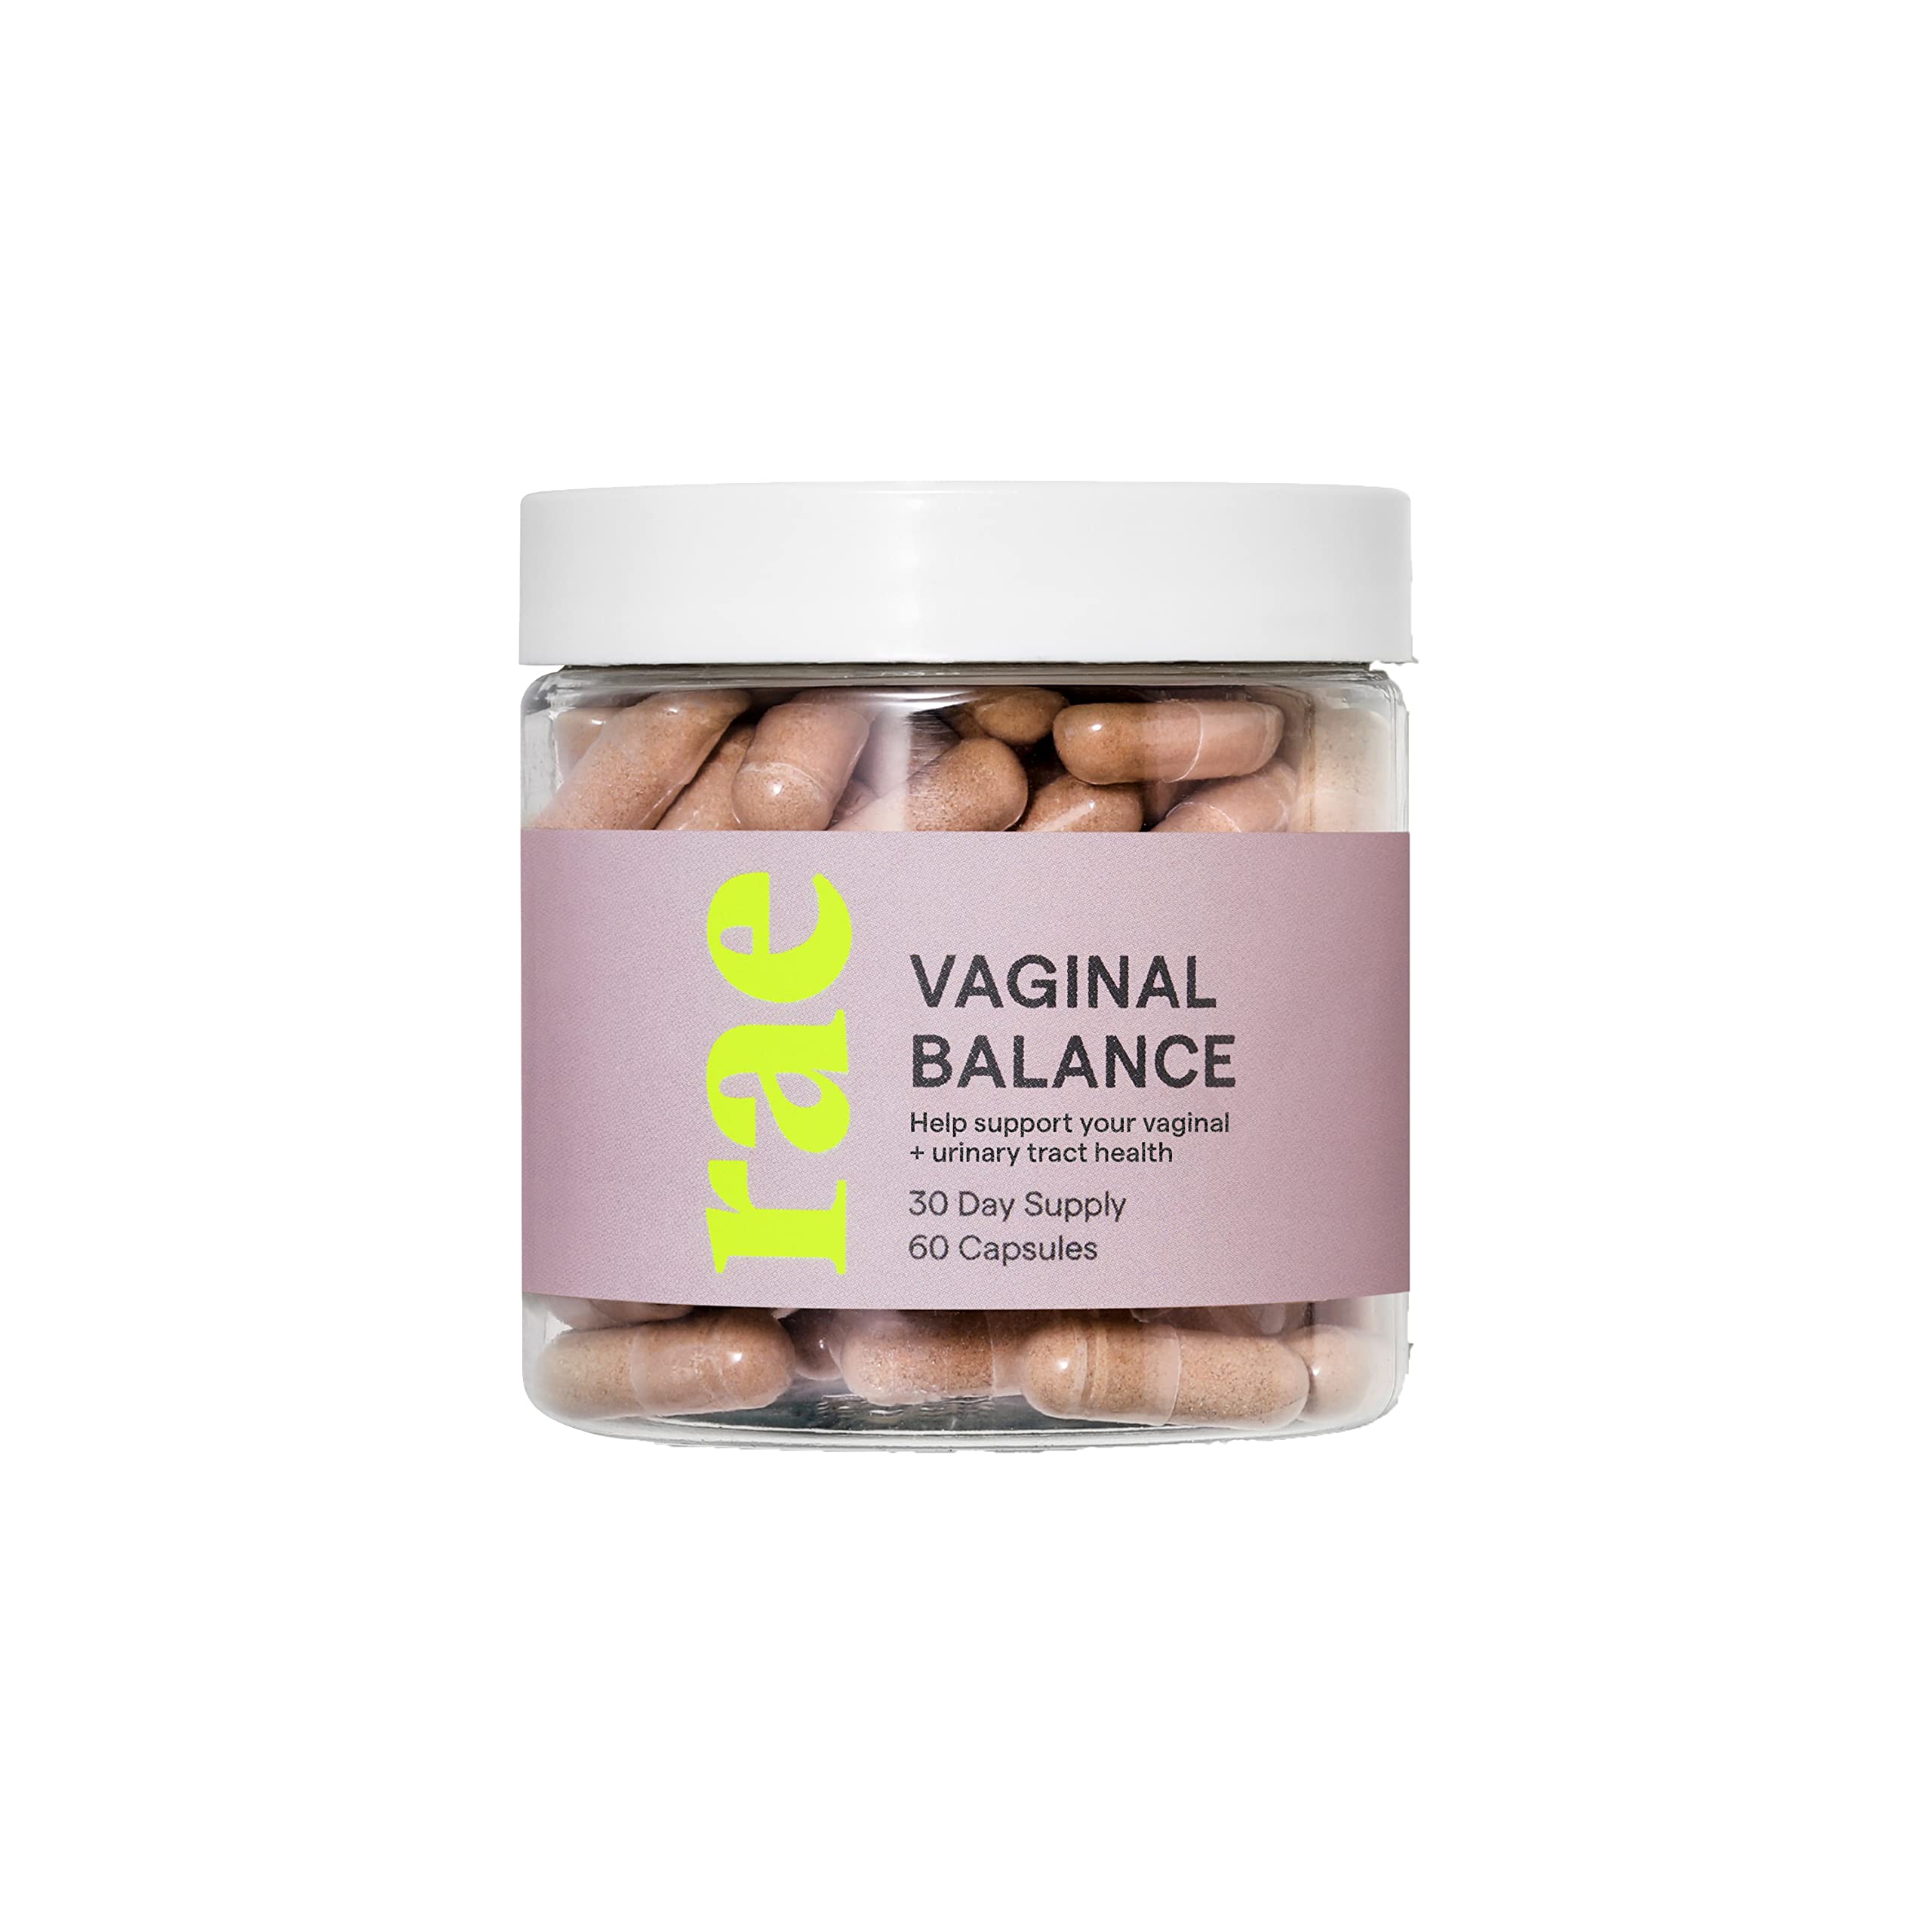 Rae Wellness Vaginal Balance Capsules - Natural Vaginal Health and Urinary Tract Supplement with Cranberry, Probiotics, Garlic and More - Vegan, Non-GMO, Gluten-Free - 60 Caps (Pack of 1)